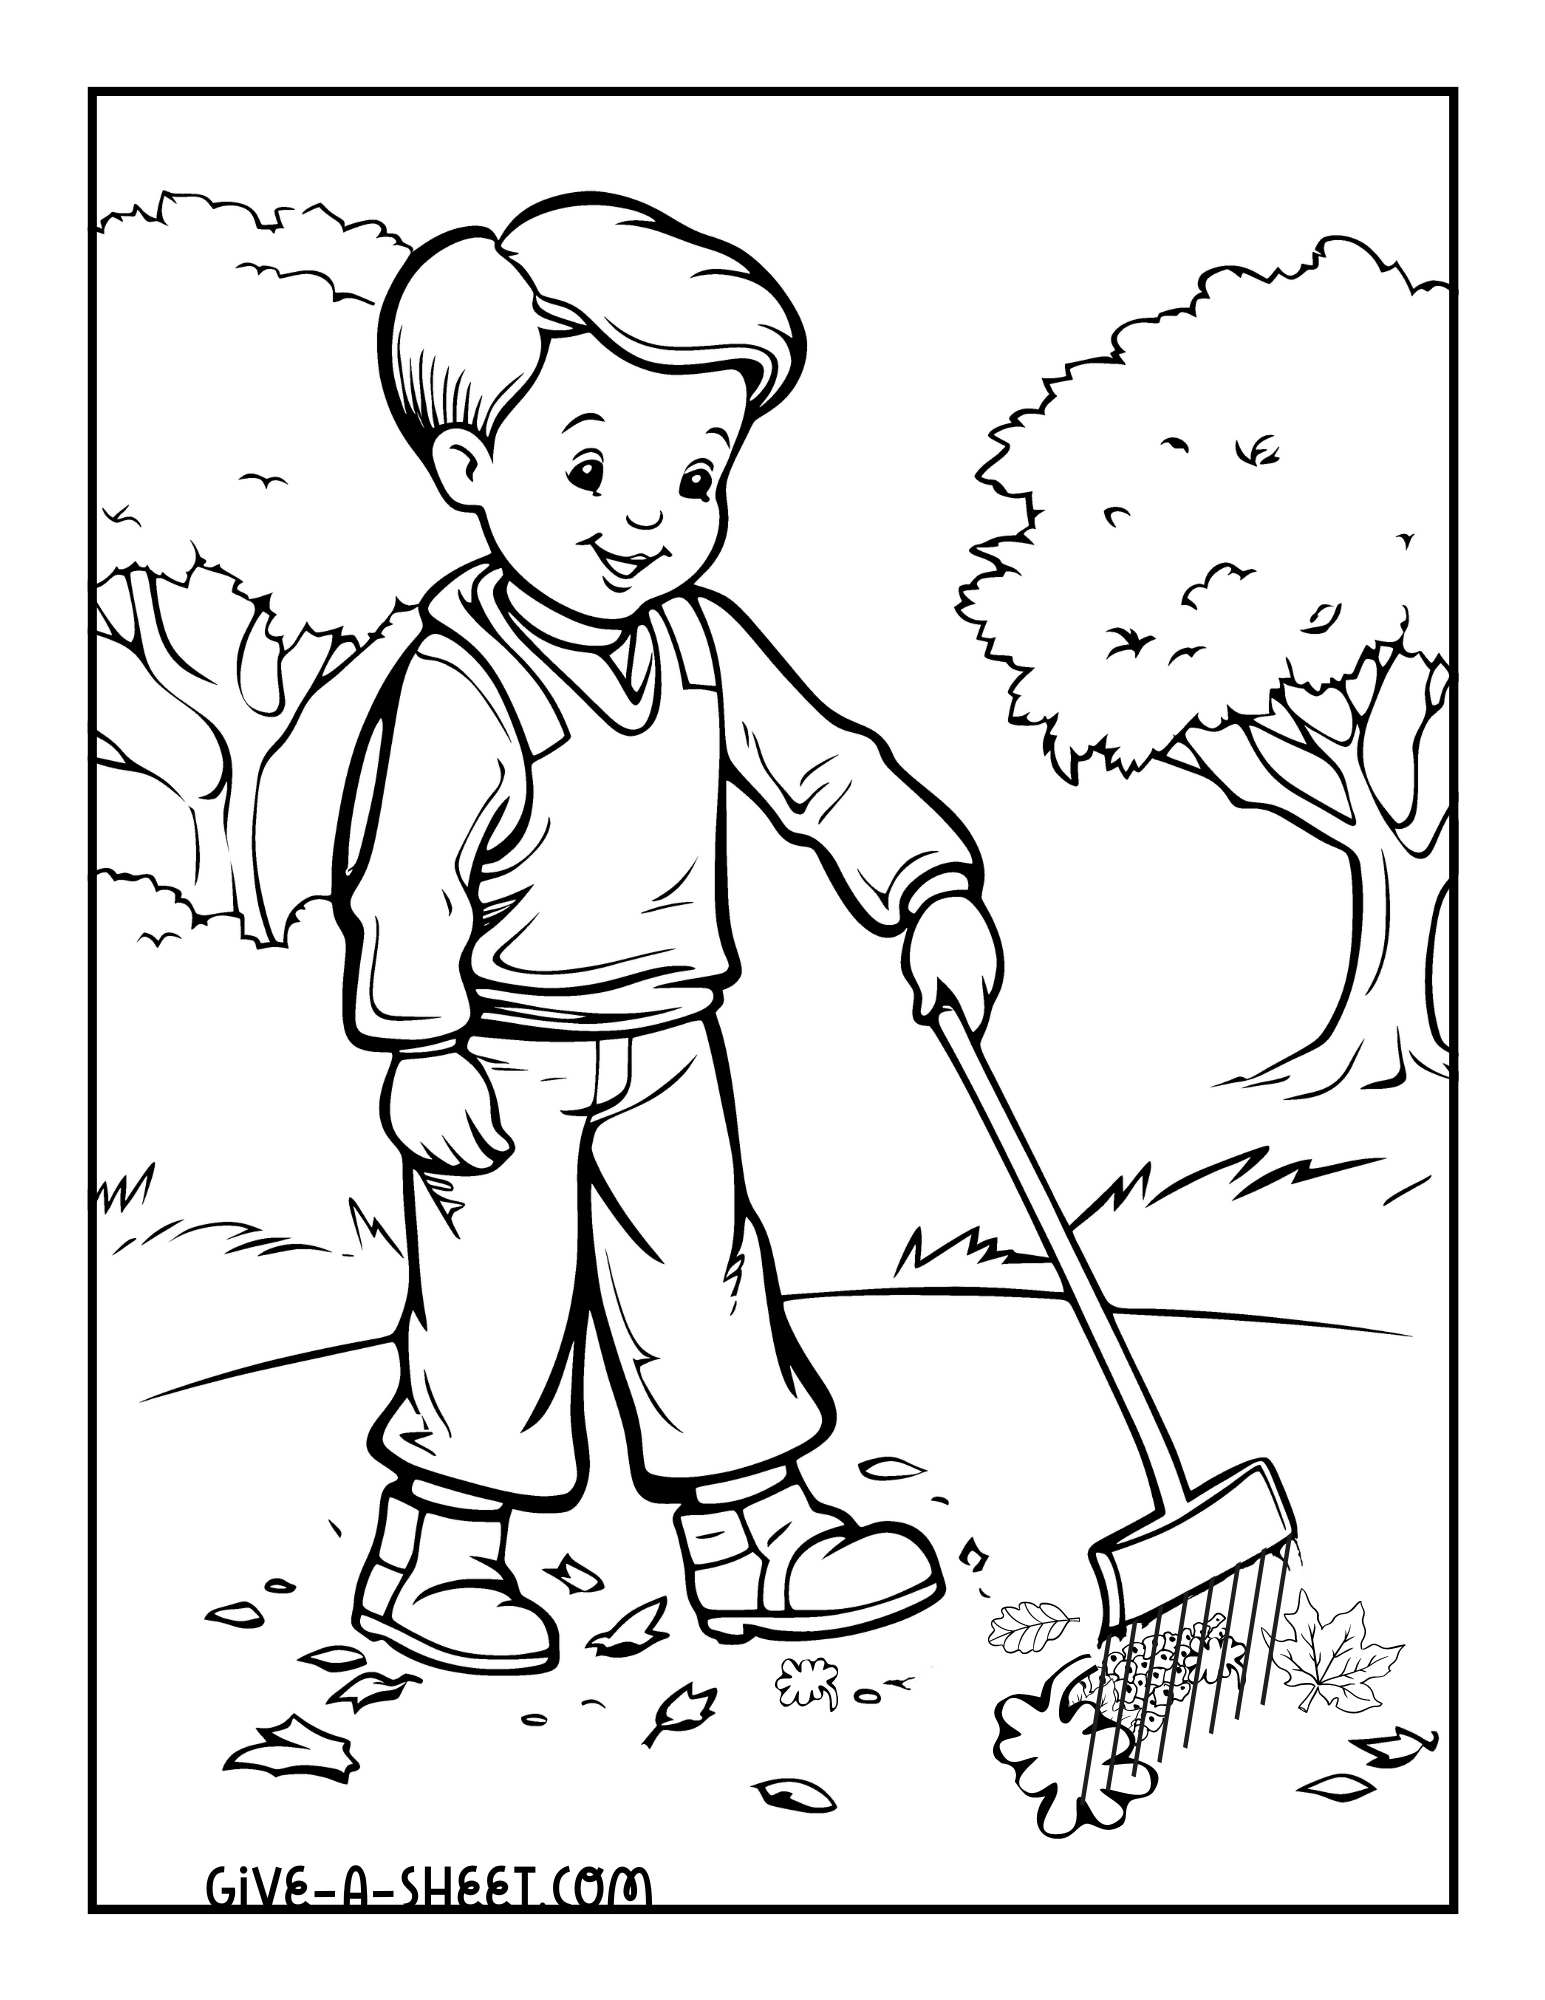 Child raking fall leaf coloring pages.